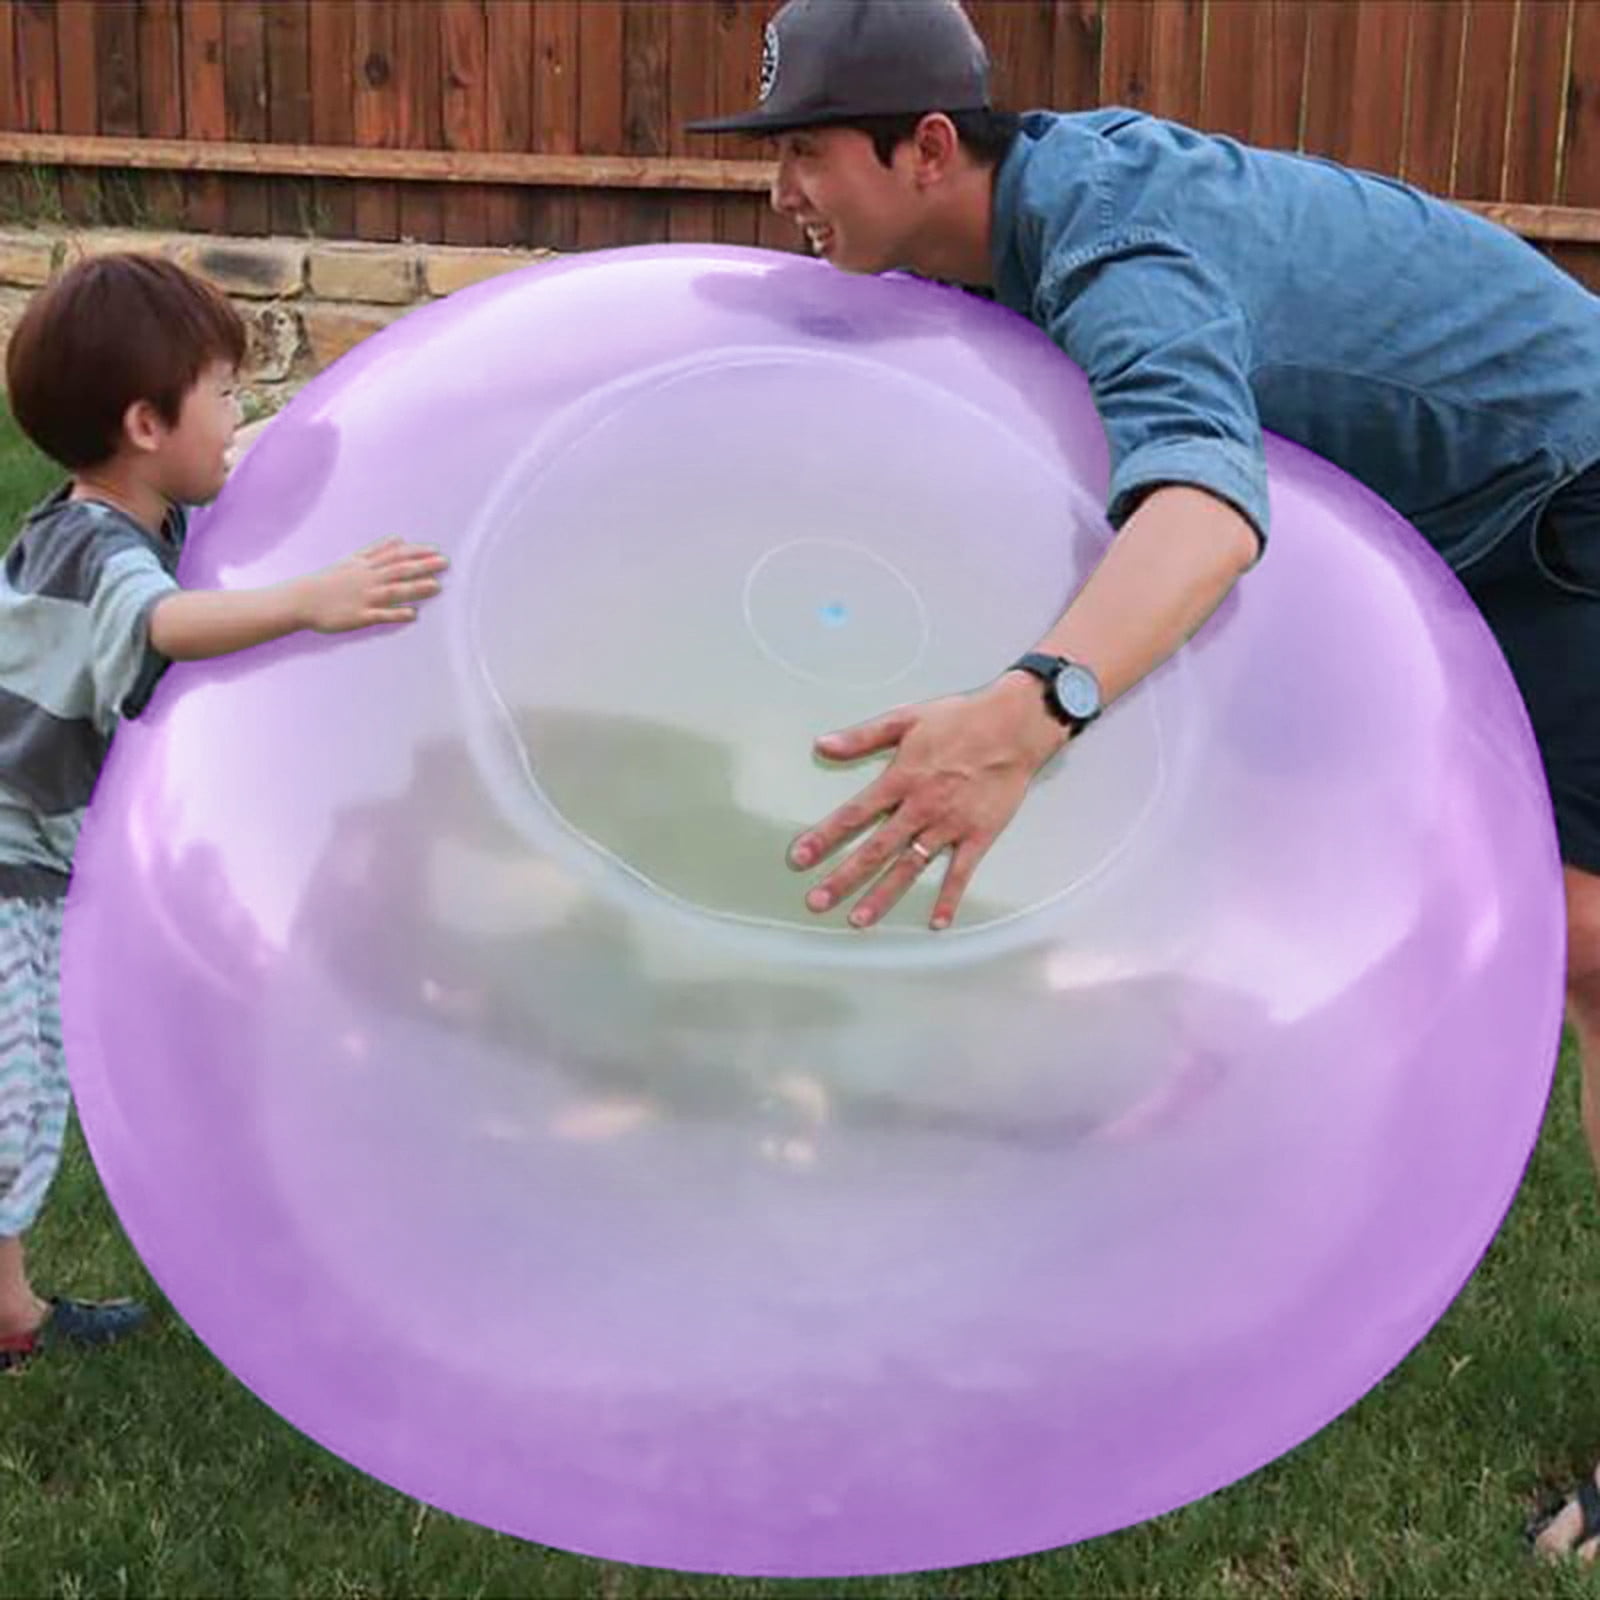 Super Soft Wubble Inflatable Bubble Ball Stretch Sport kids Child Play Toy S/M/L 